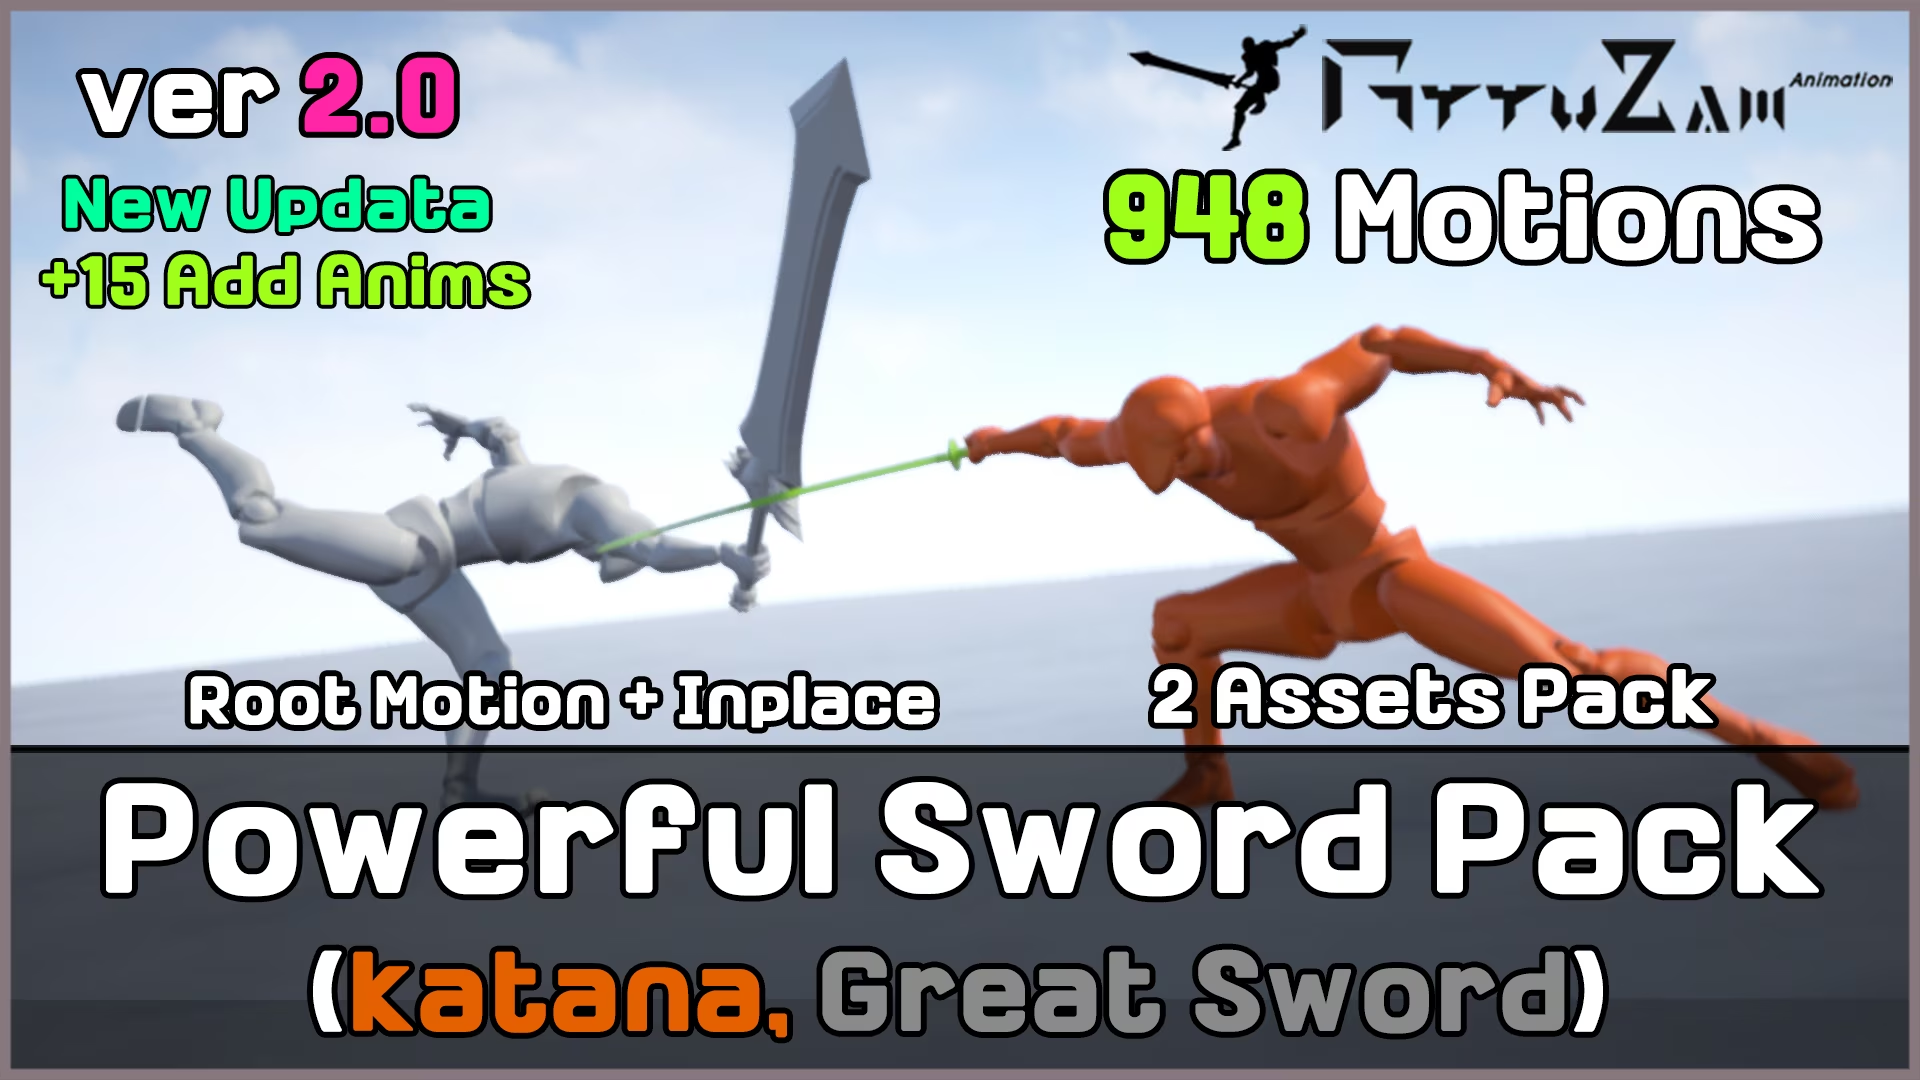 2 Assets Powerful Sword Pack (Unreal Engine)